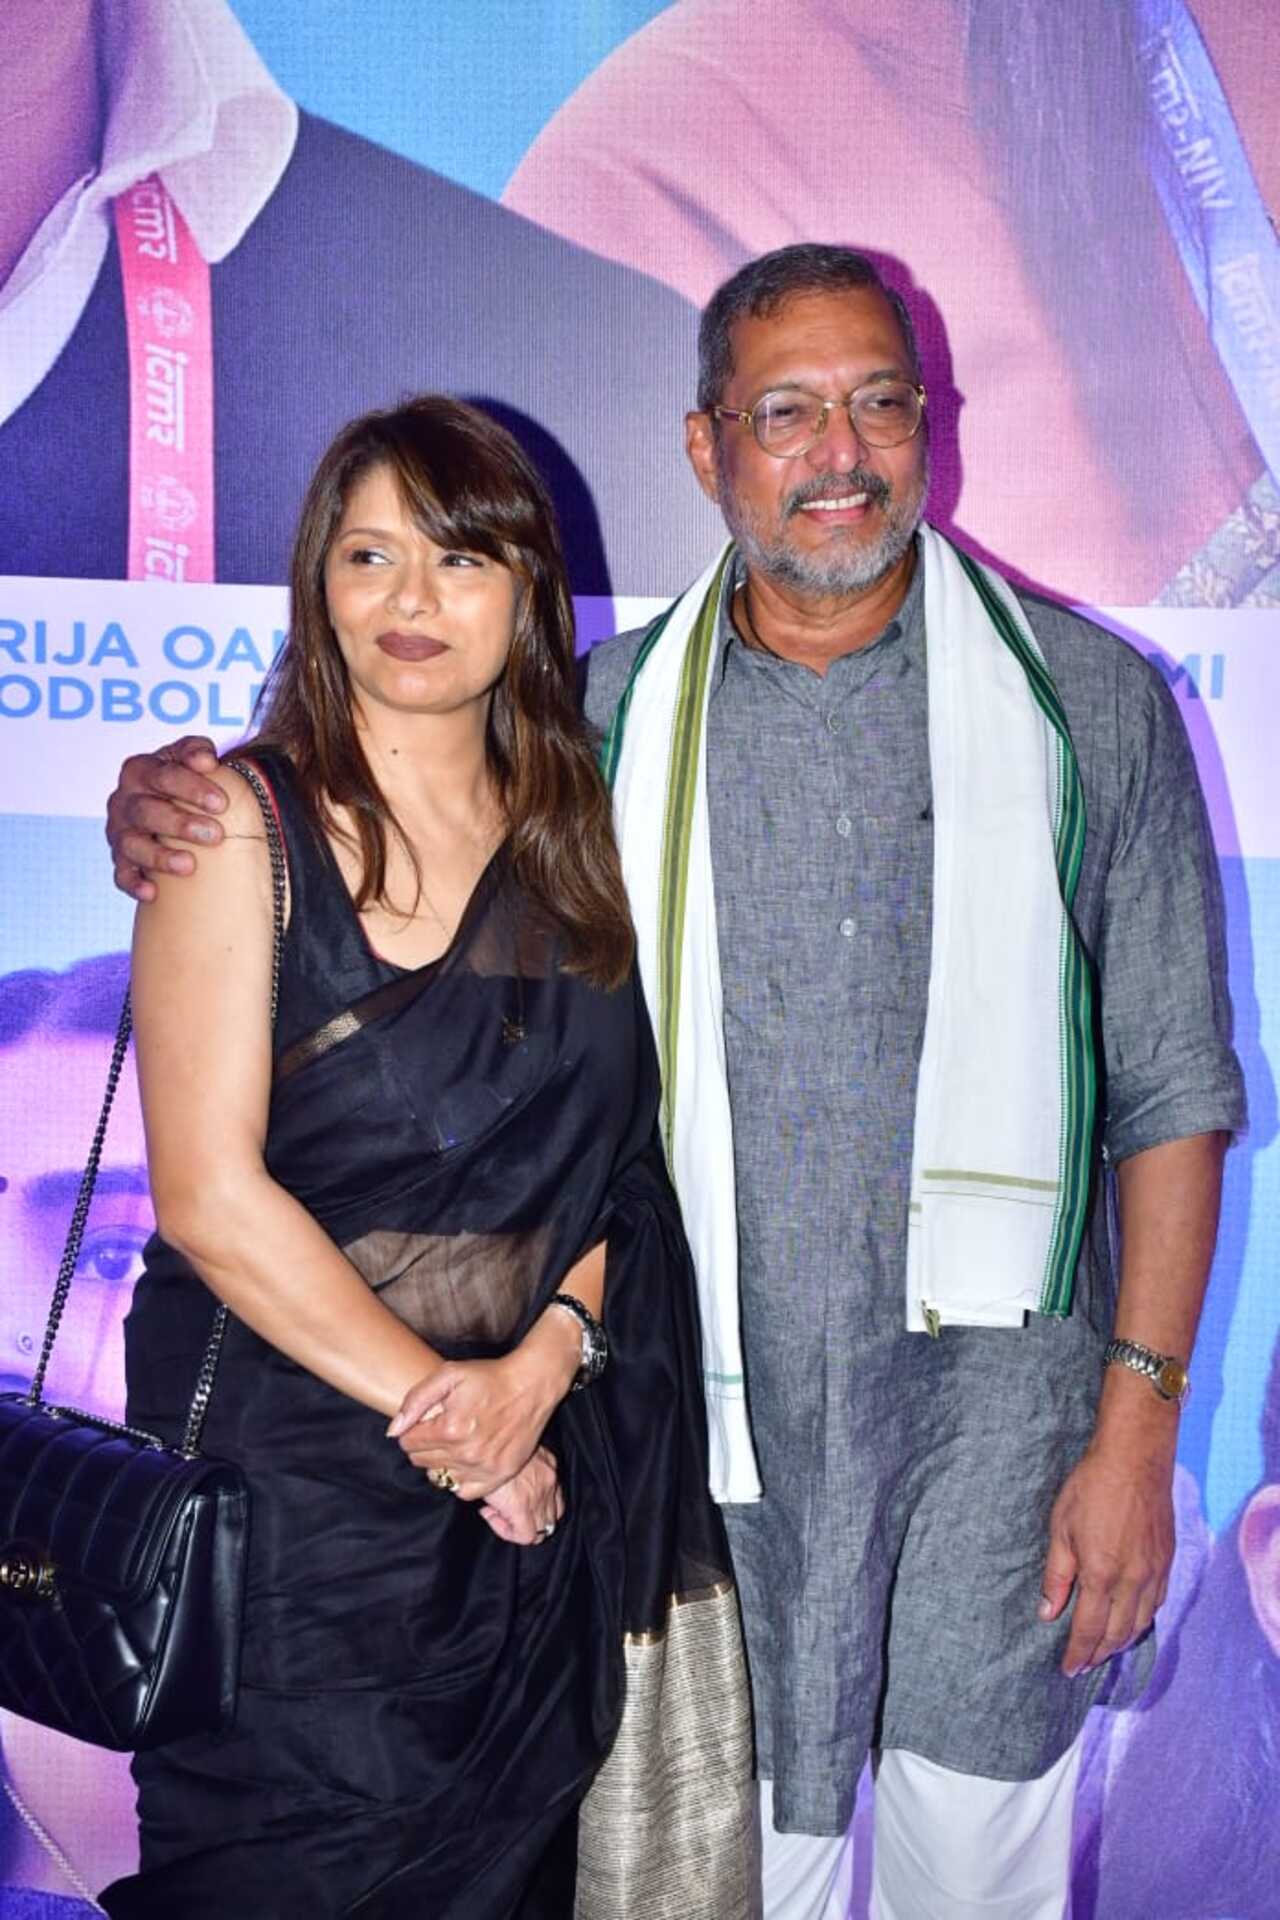 Pallavi posed for pictures with her co-star Nana Patekar. They are headlining the film with an ensemble